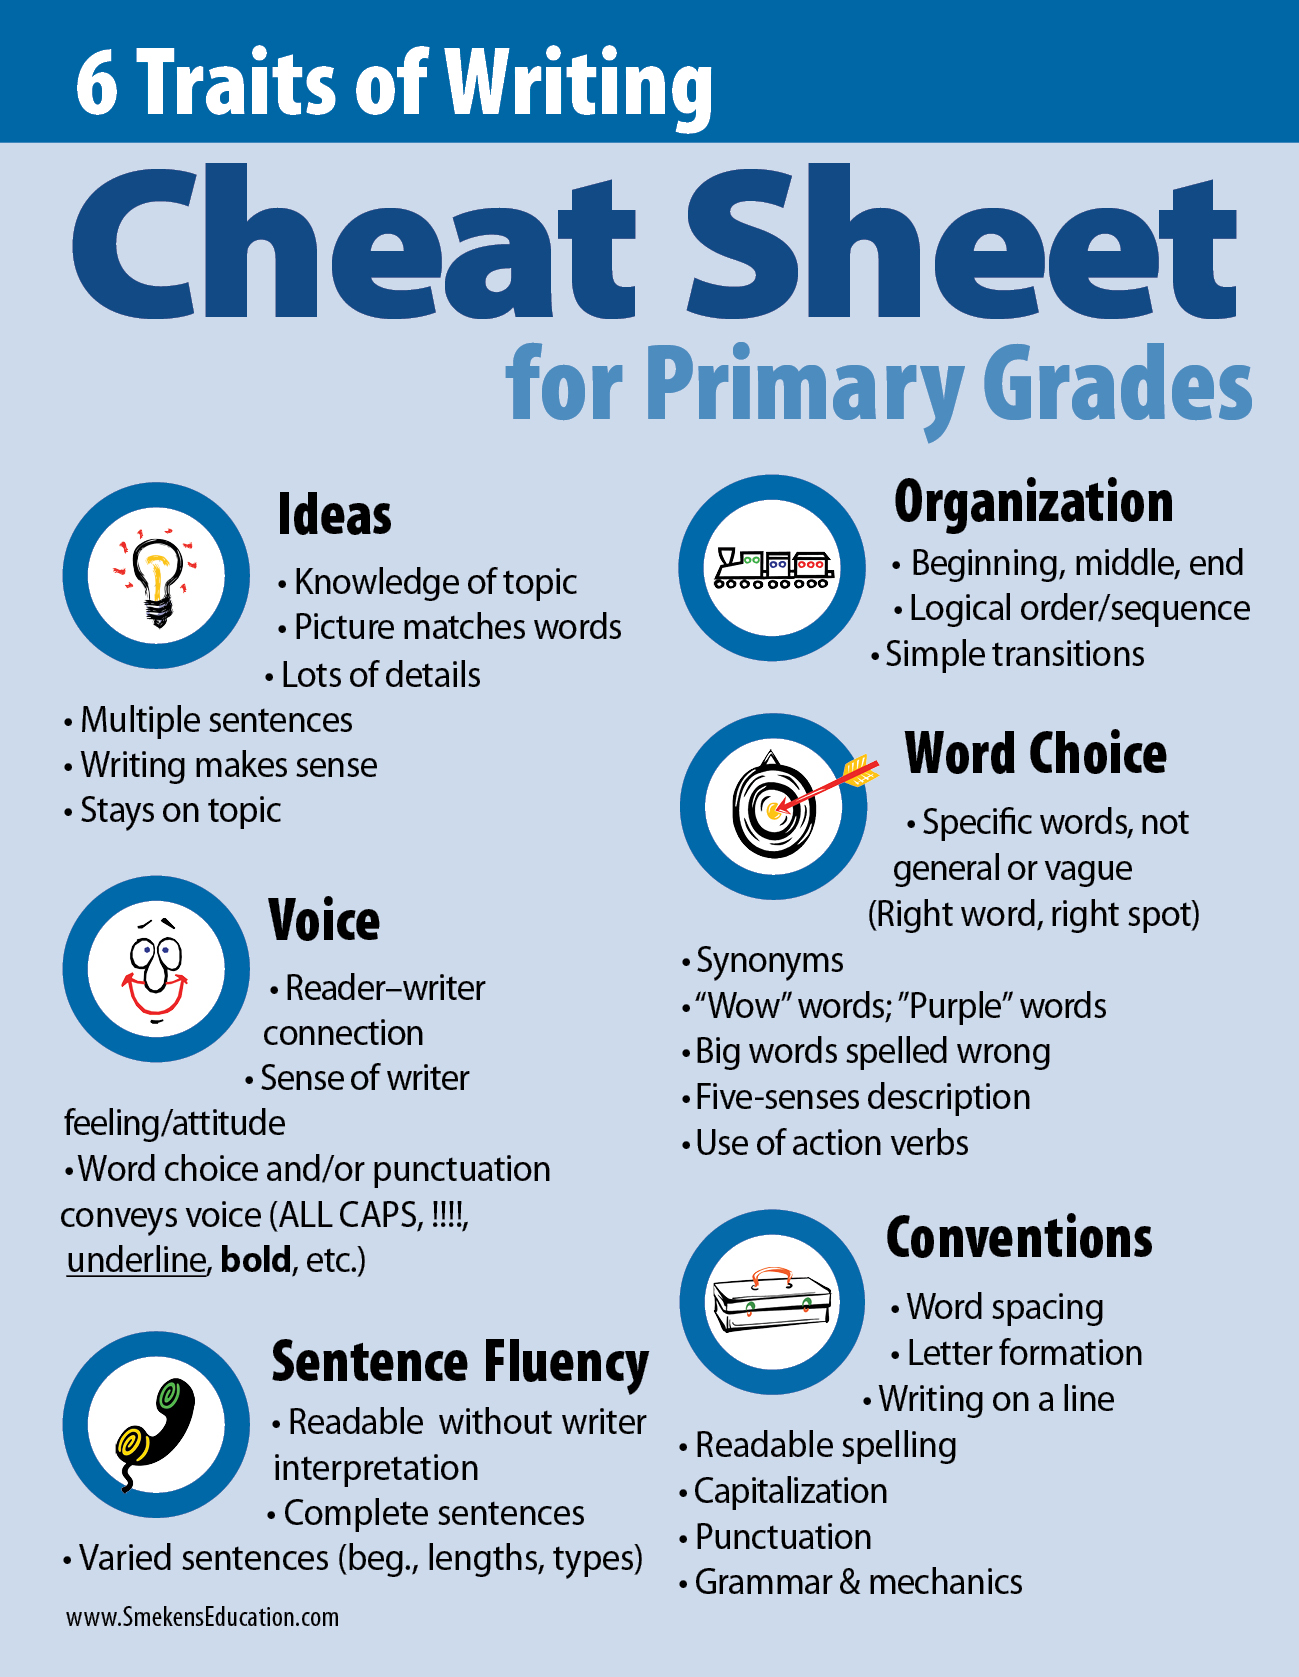 6 Traits of Writing: Cheat Sheet for Primary Grades